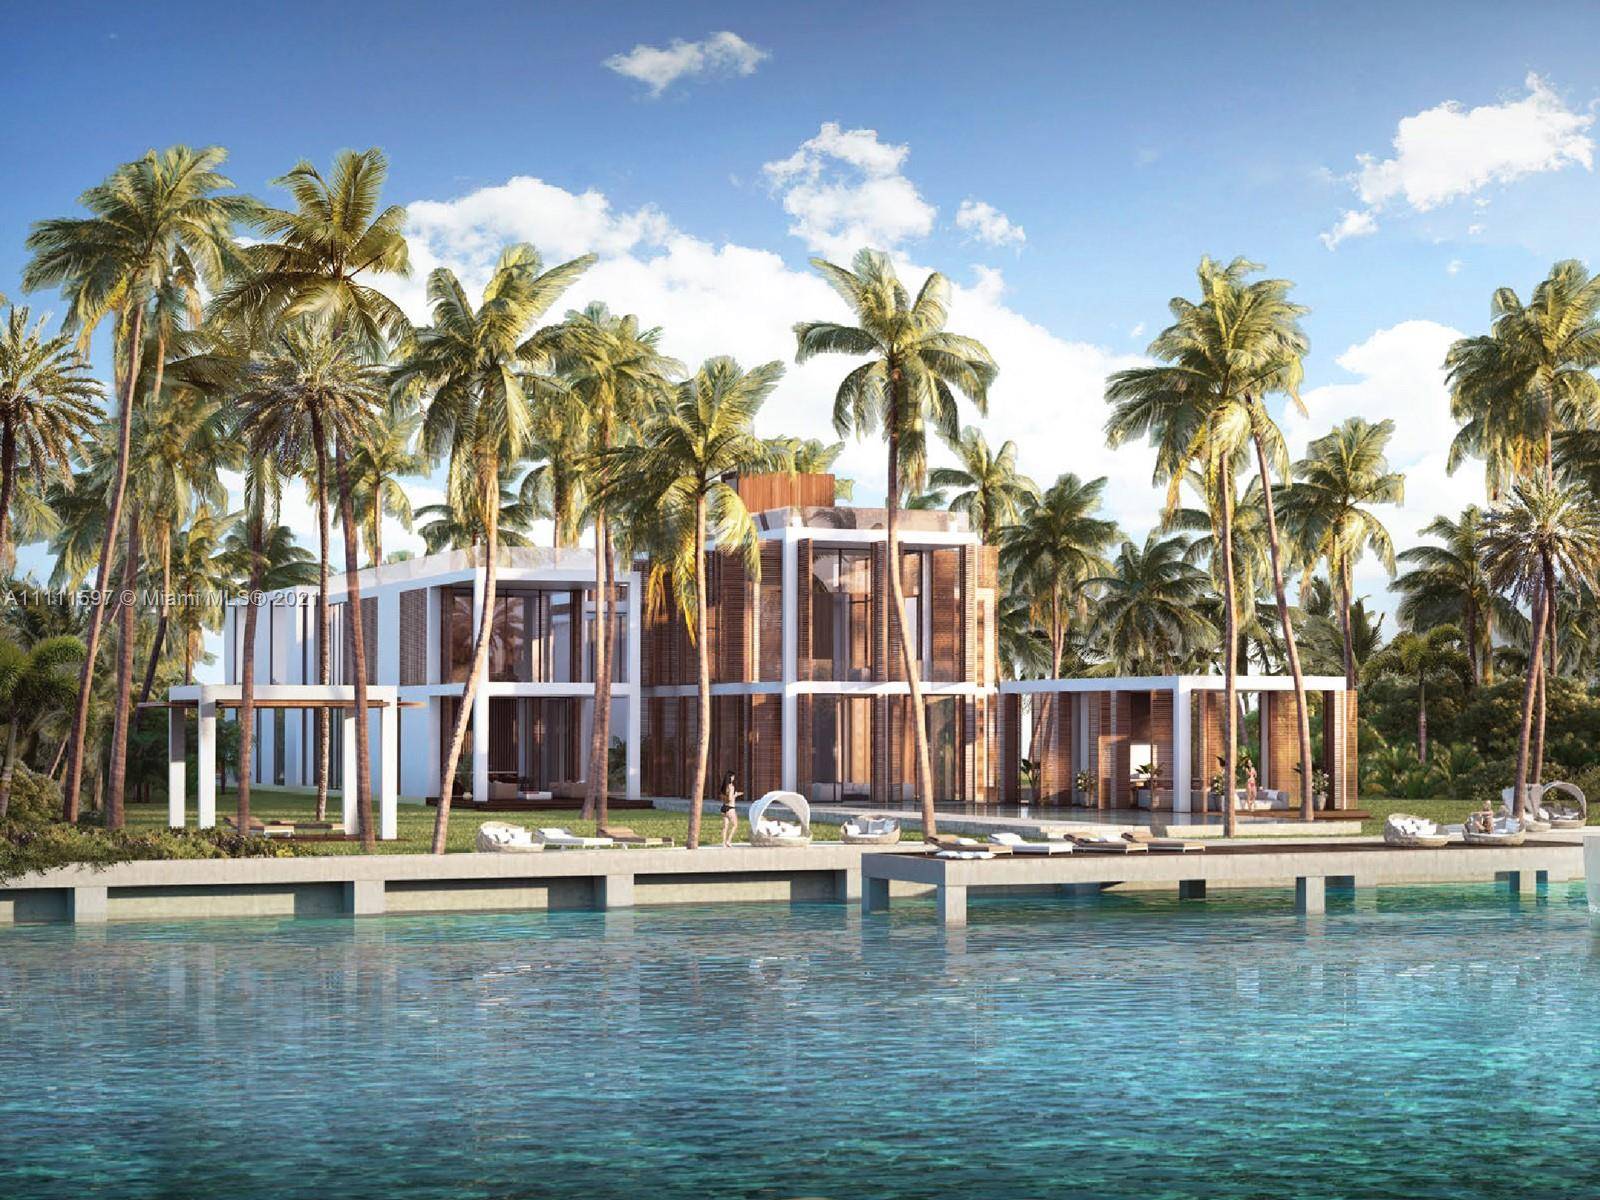 Presenting Fons Praedenum Robber's Spring, an impressive waterfront estate located on Millionaire s Row, offering unparalleled picturesque views of Biscayne Bay and Key Biscayne.